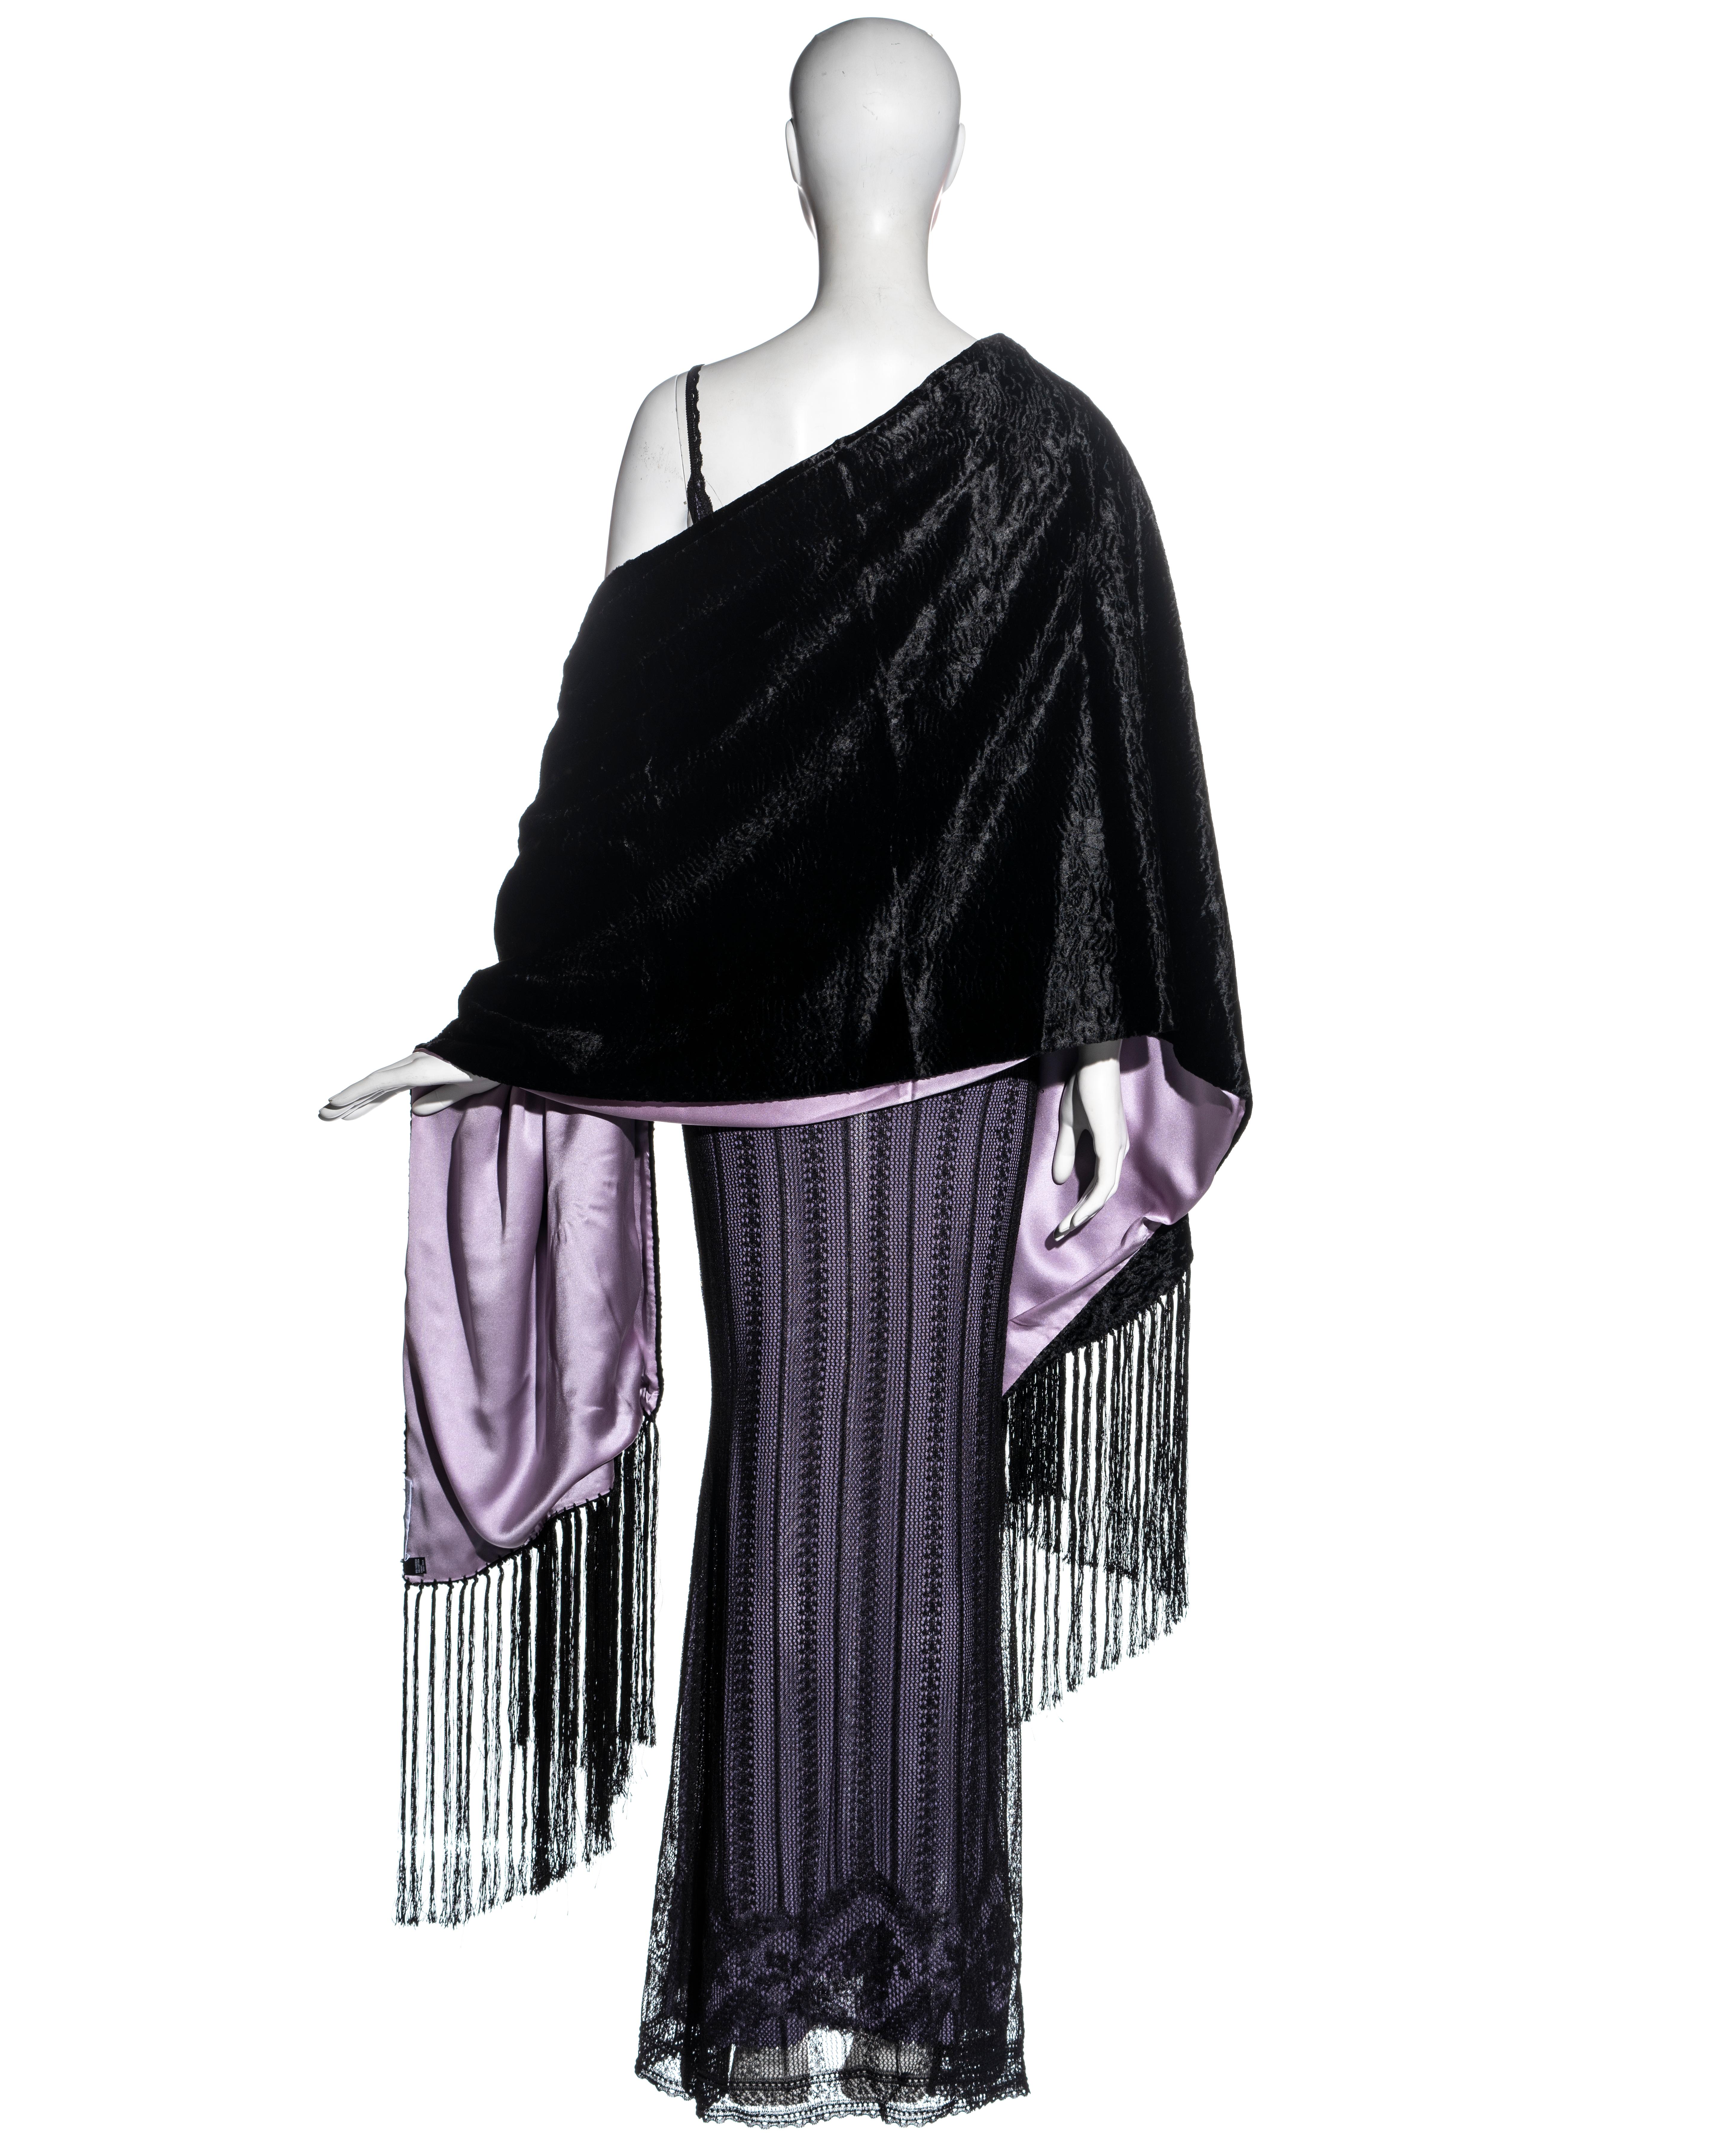 Christian Dior by John Galliano black lace evening dress and shawl, fw 1998 For Sale 2